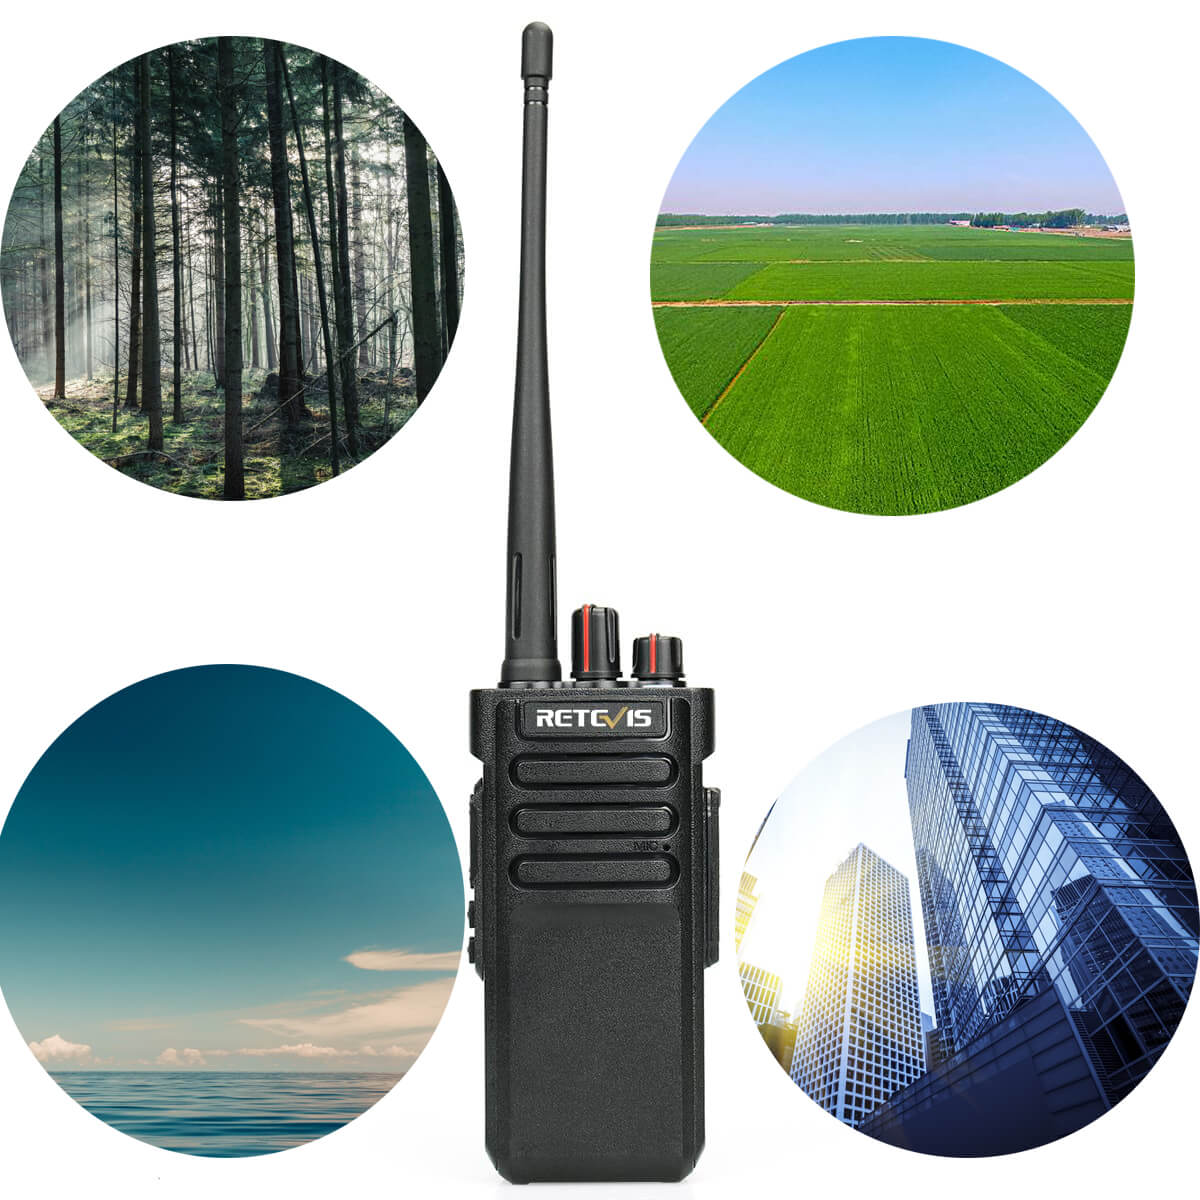 The transmission distance of the walkie-talkie is different in different environments